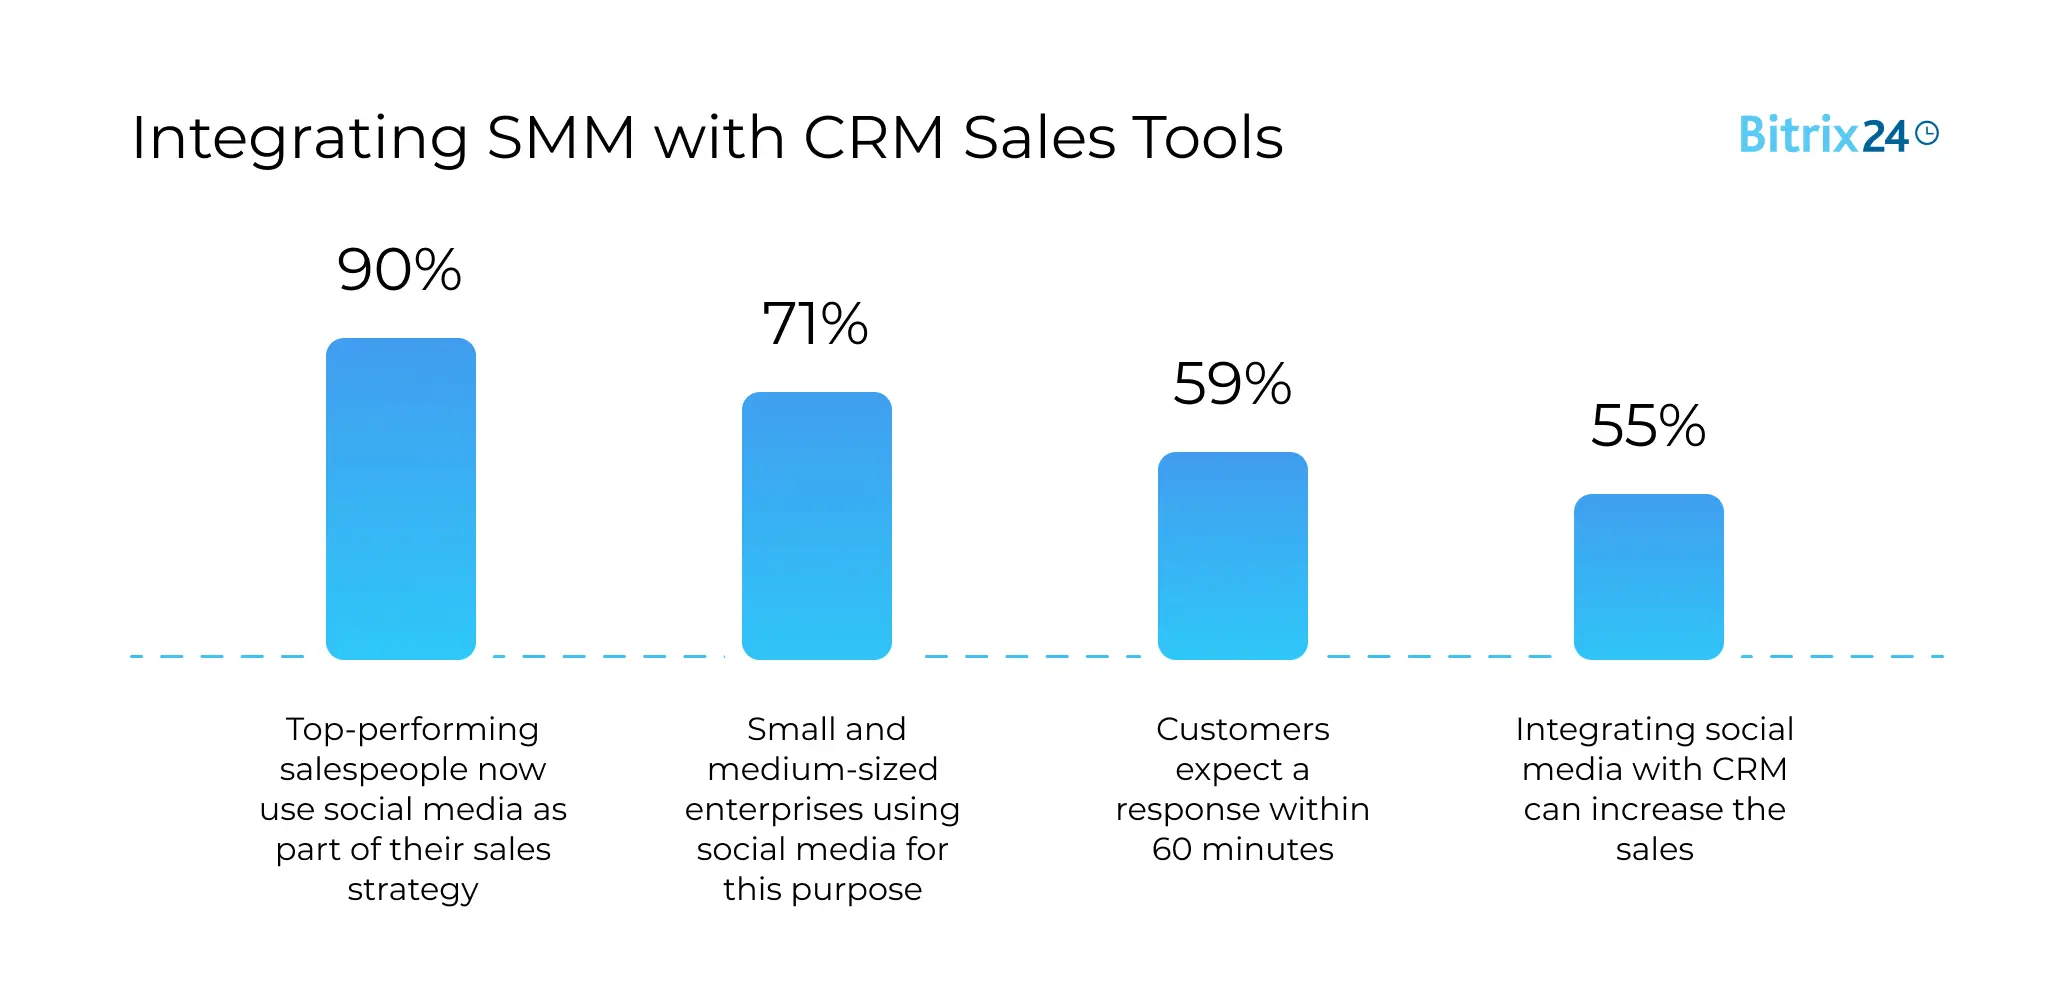 Integration SMM with CRM Sales Tools